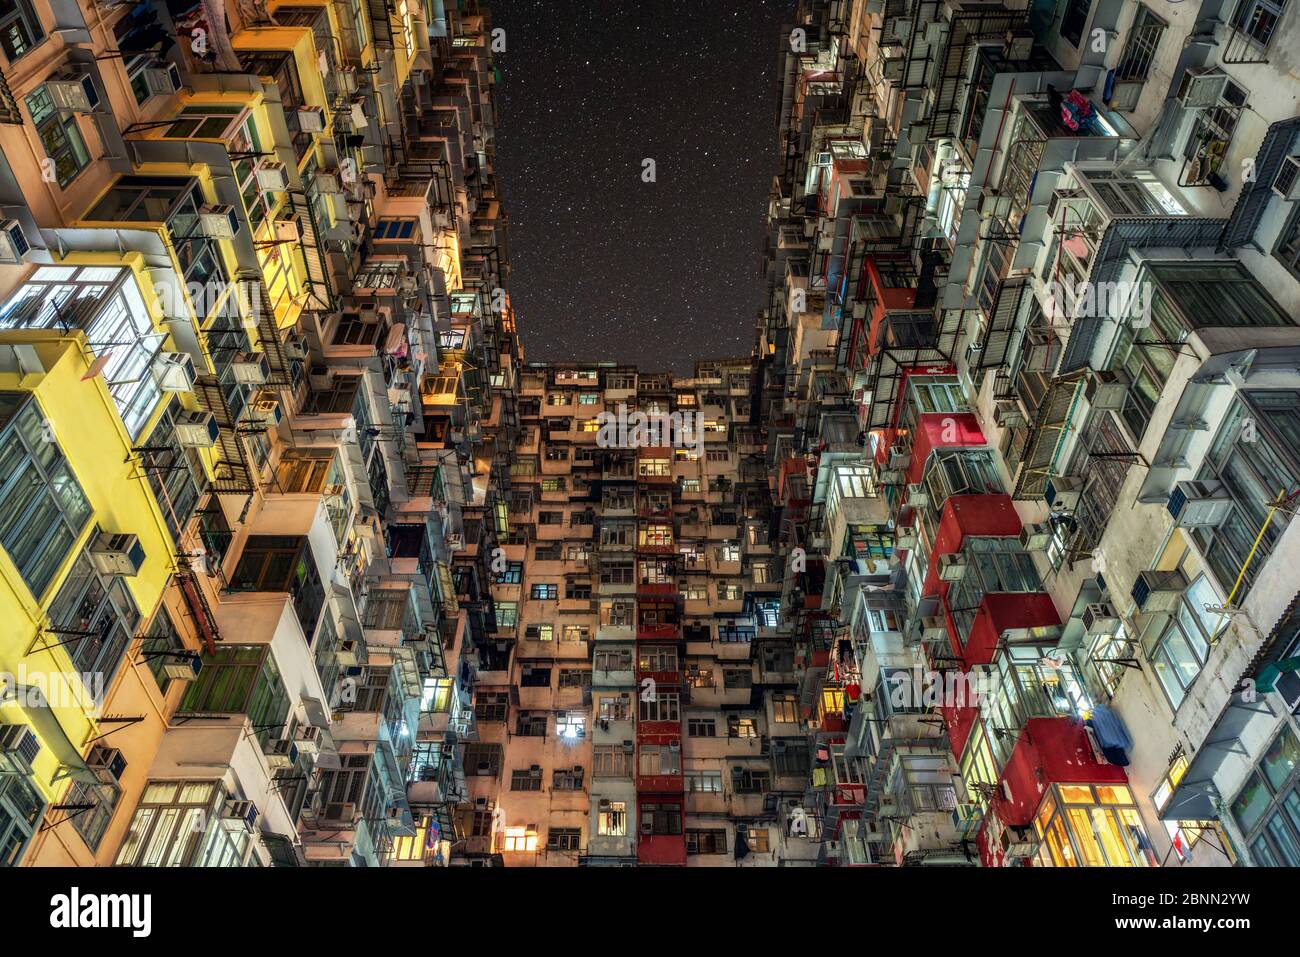 China, Hong Kong, densely populated courtyard in the evening Stock Photo